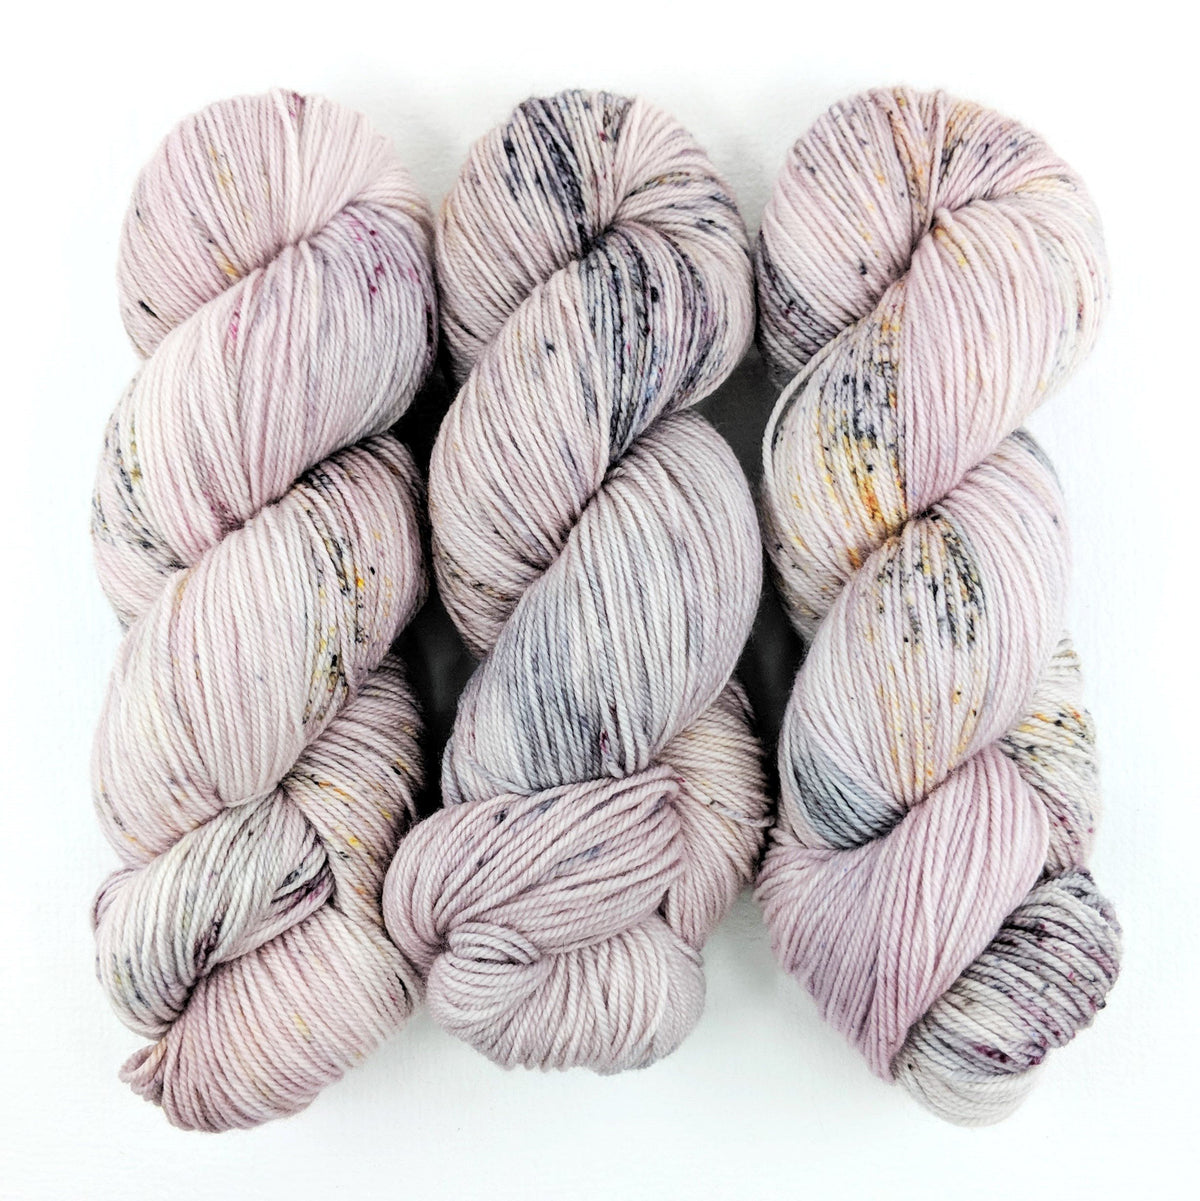 Grannies in Lace - Passion 8 Fingering - Dyed Stock